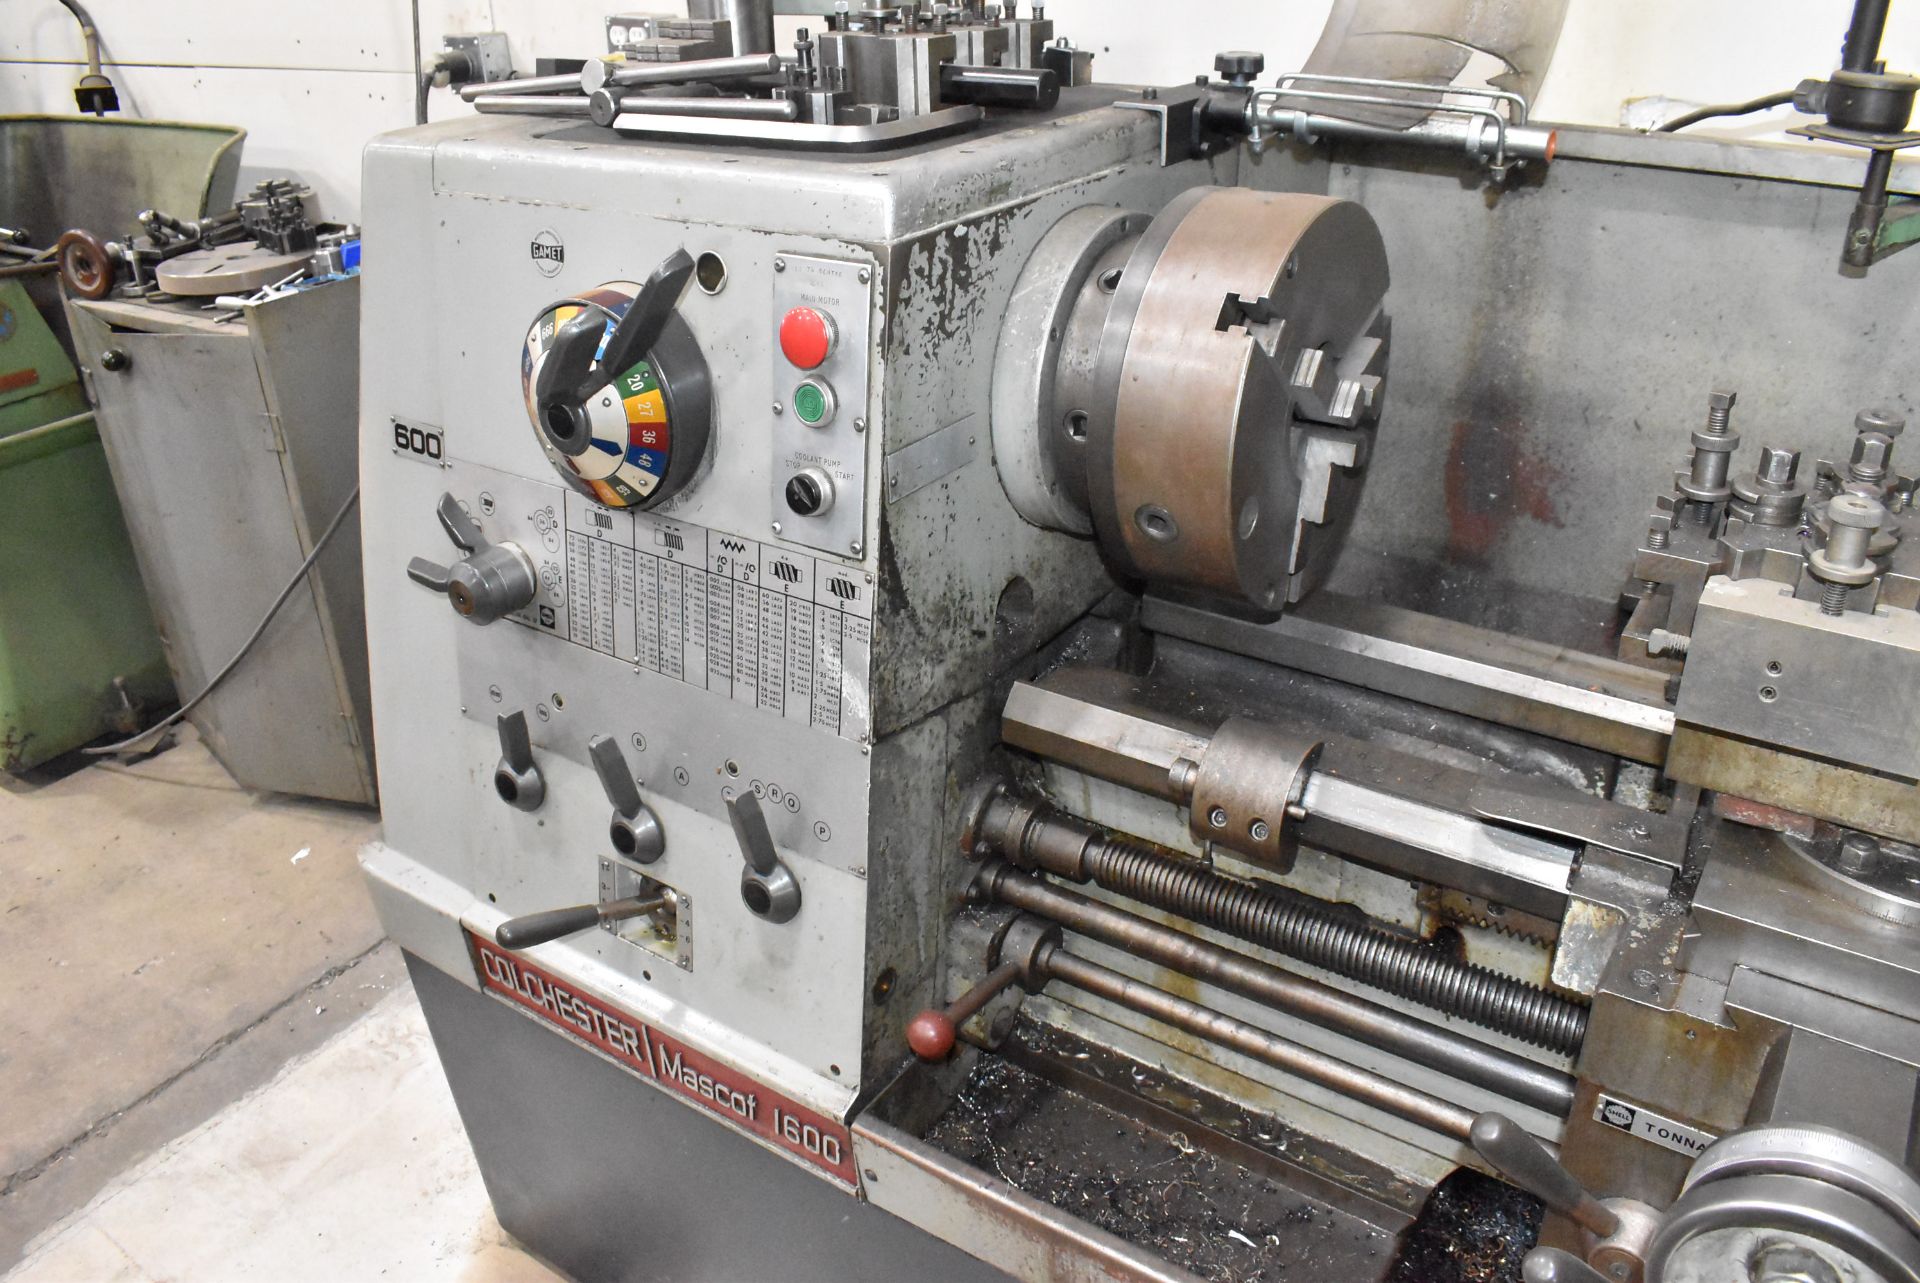 COLCHESTER MASCOT 1600 GAP BED ENGINE LATHE WITH 17" SWING, 40" BETWEEN CENTERS, SPEEDS TO 1,600 - Image 3 of 8